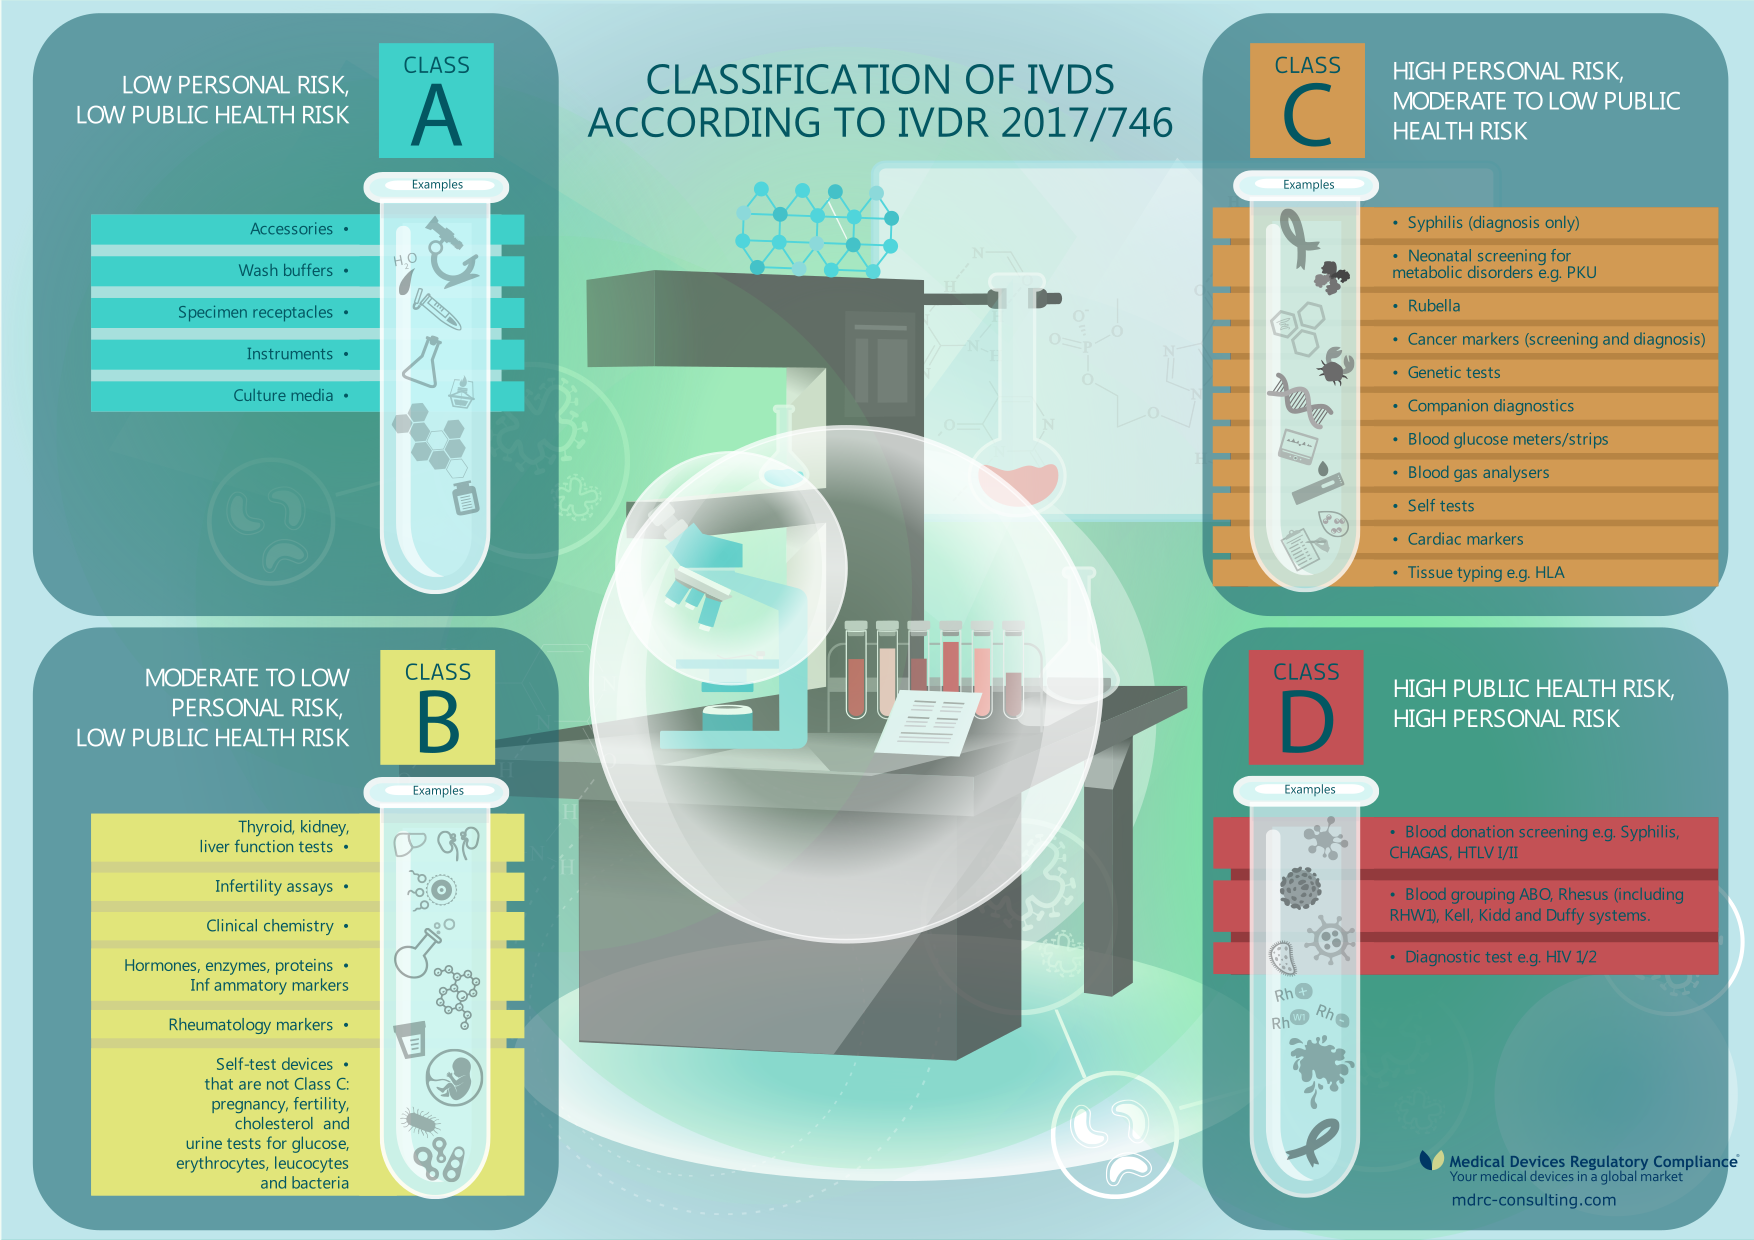 European classification of in vitro diagnostic medical devices according to IVDR 2017/746, examples